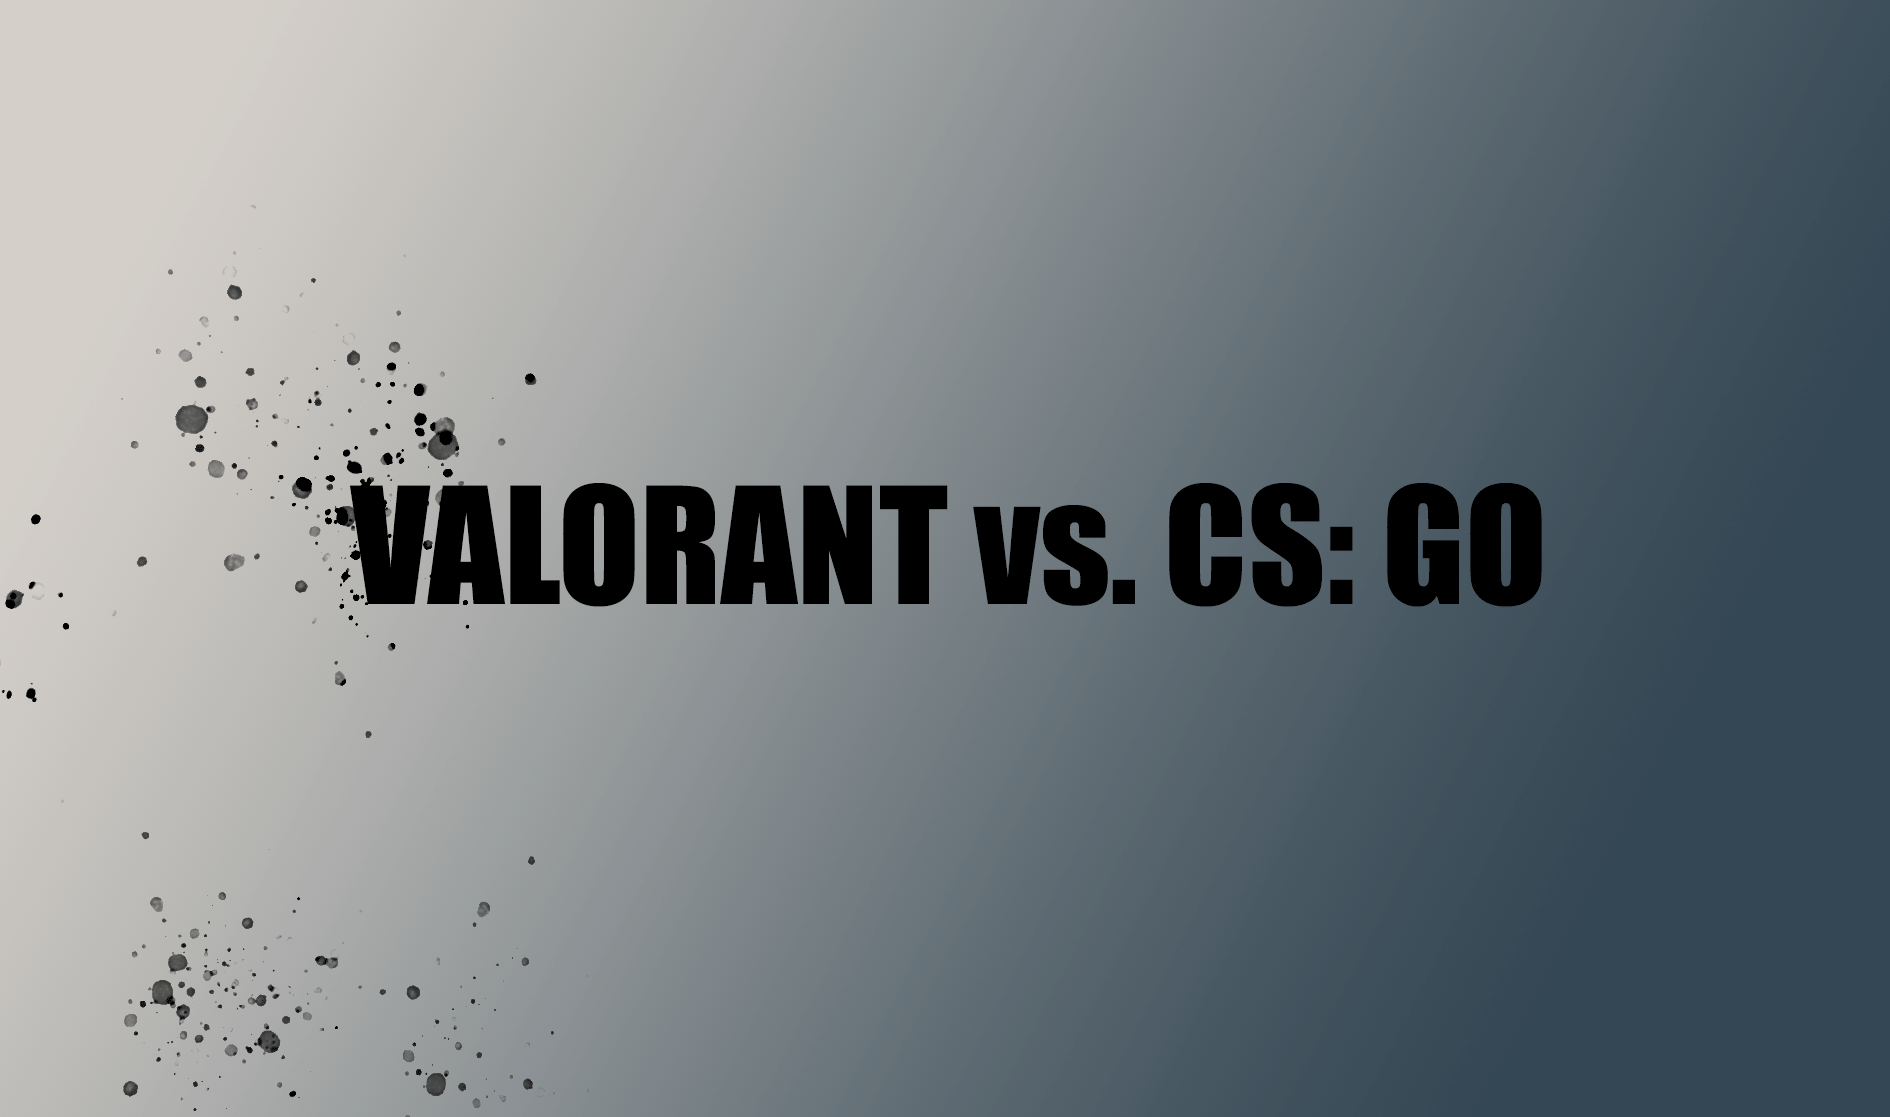 What are the advantages of Valorant vs. CS: GO?